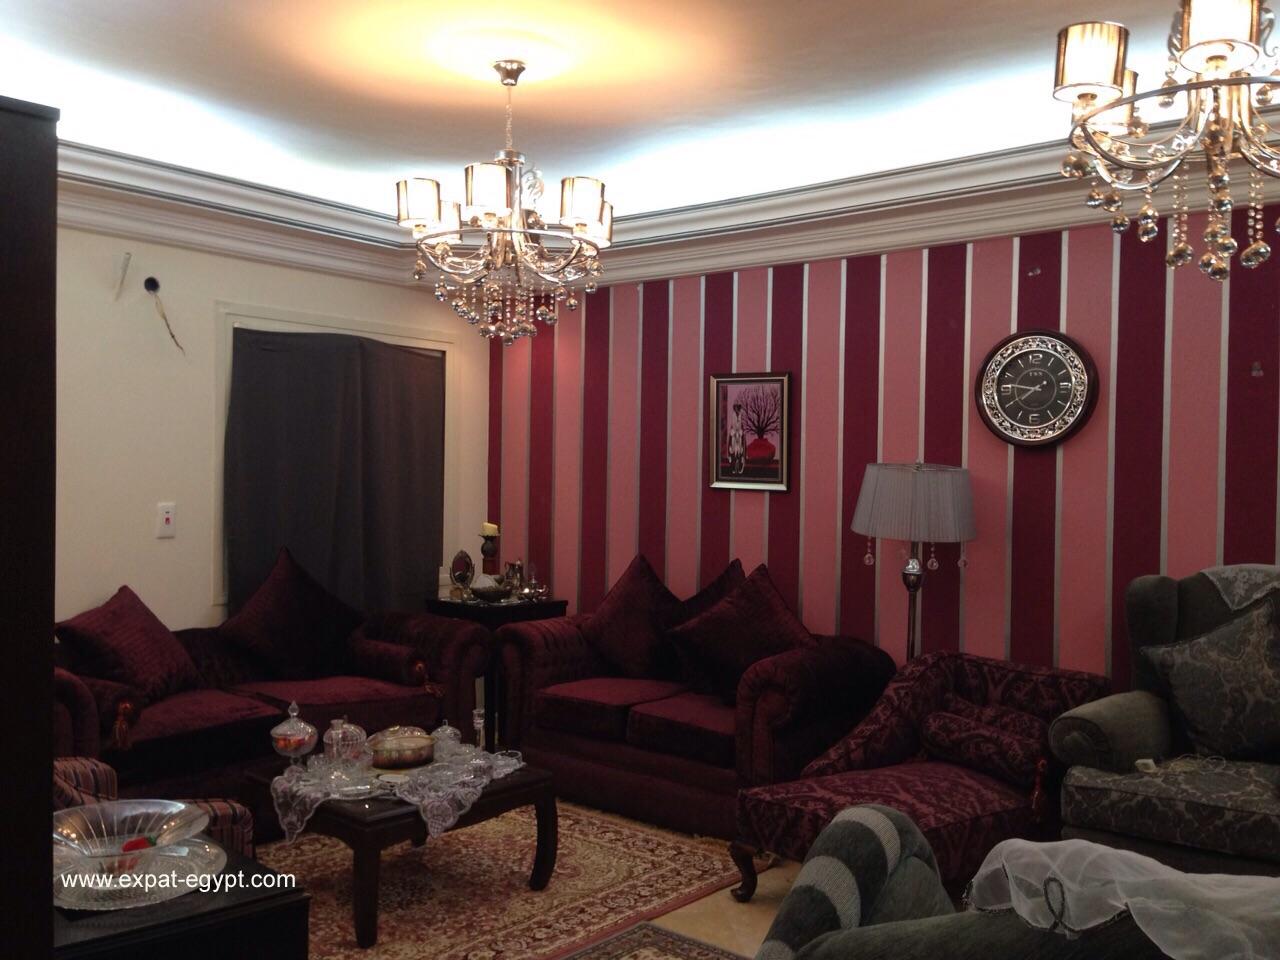 A great opportunity apartment for sale with an attractive price in dreamland 